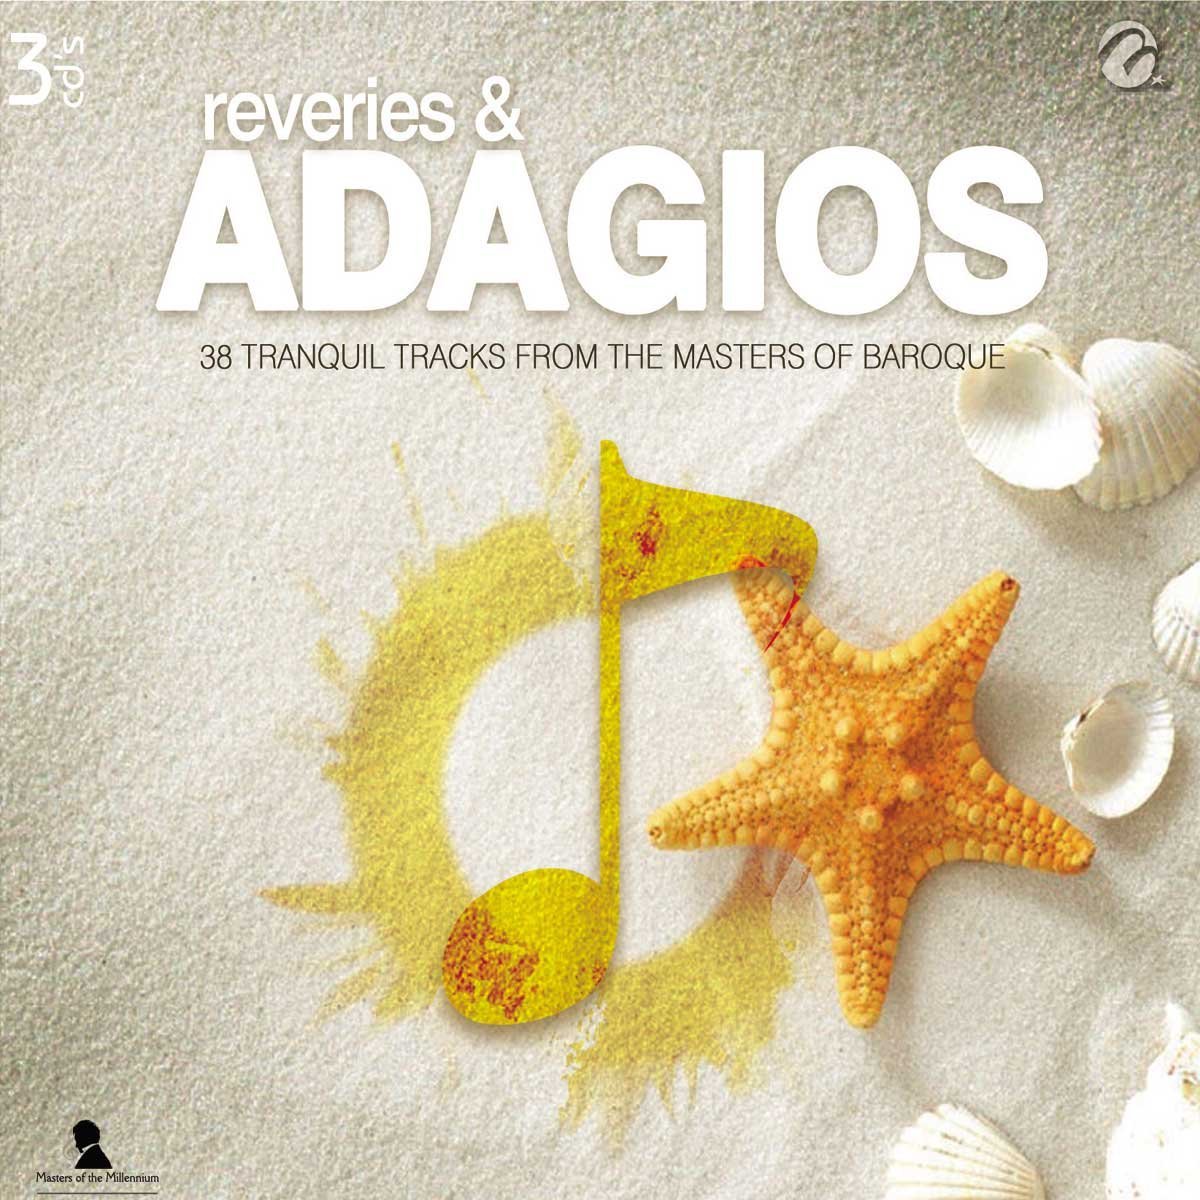 3 Cds   3 &iquest;adagios? And Reveries